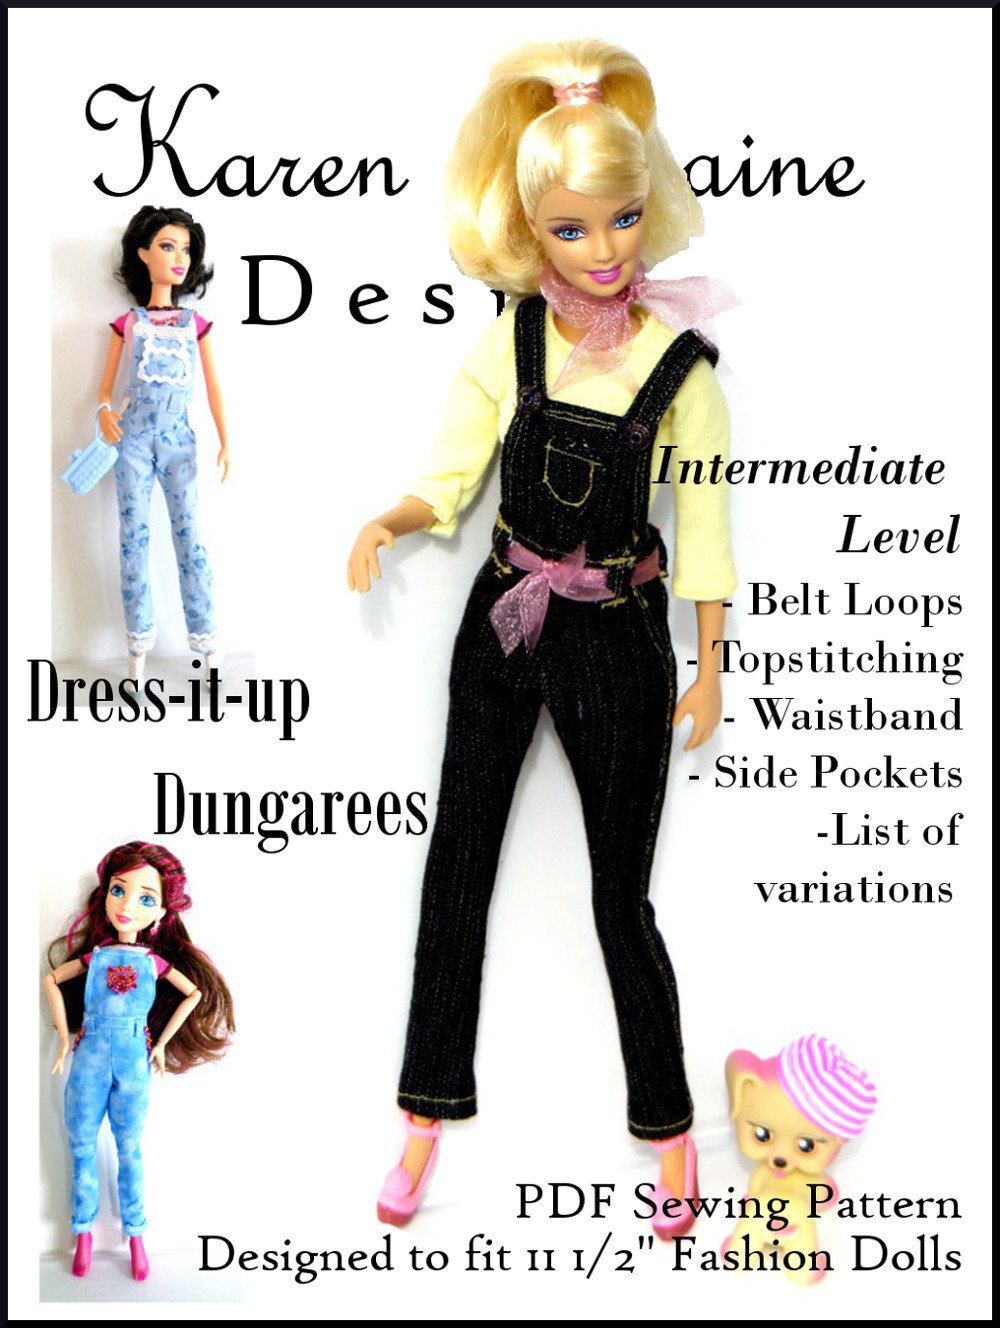 Dress it up Dungarees Pattern 11 1/2 inch Fashion Dolls such as